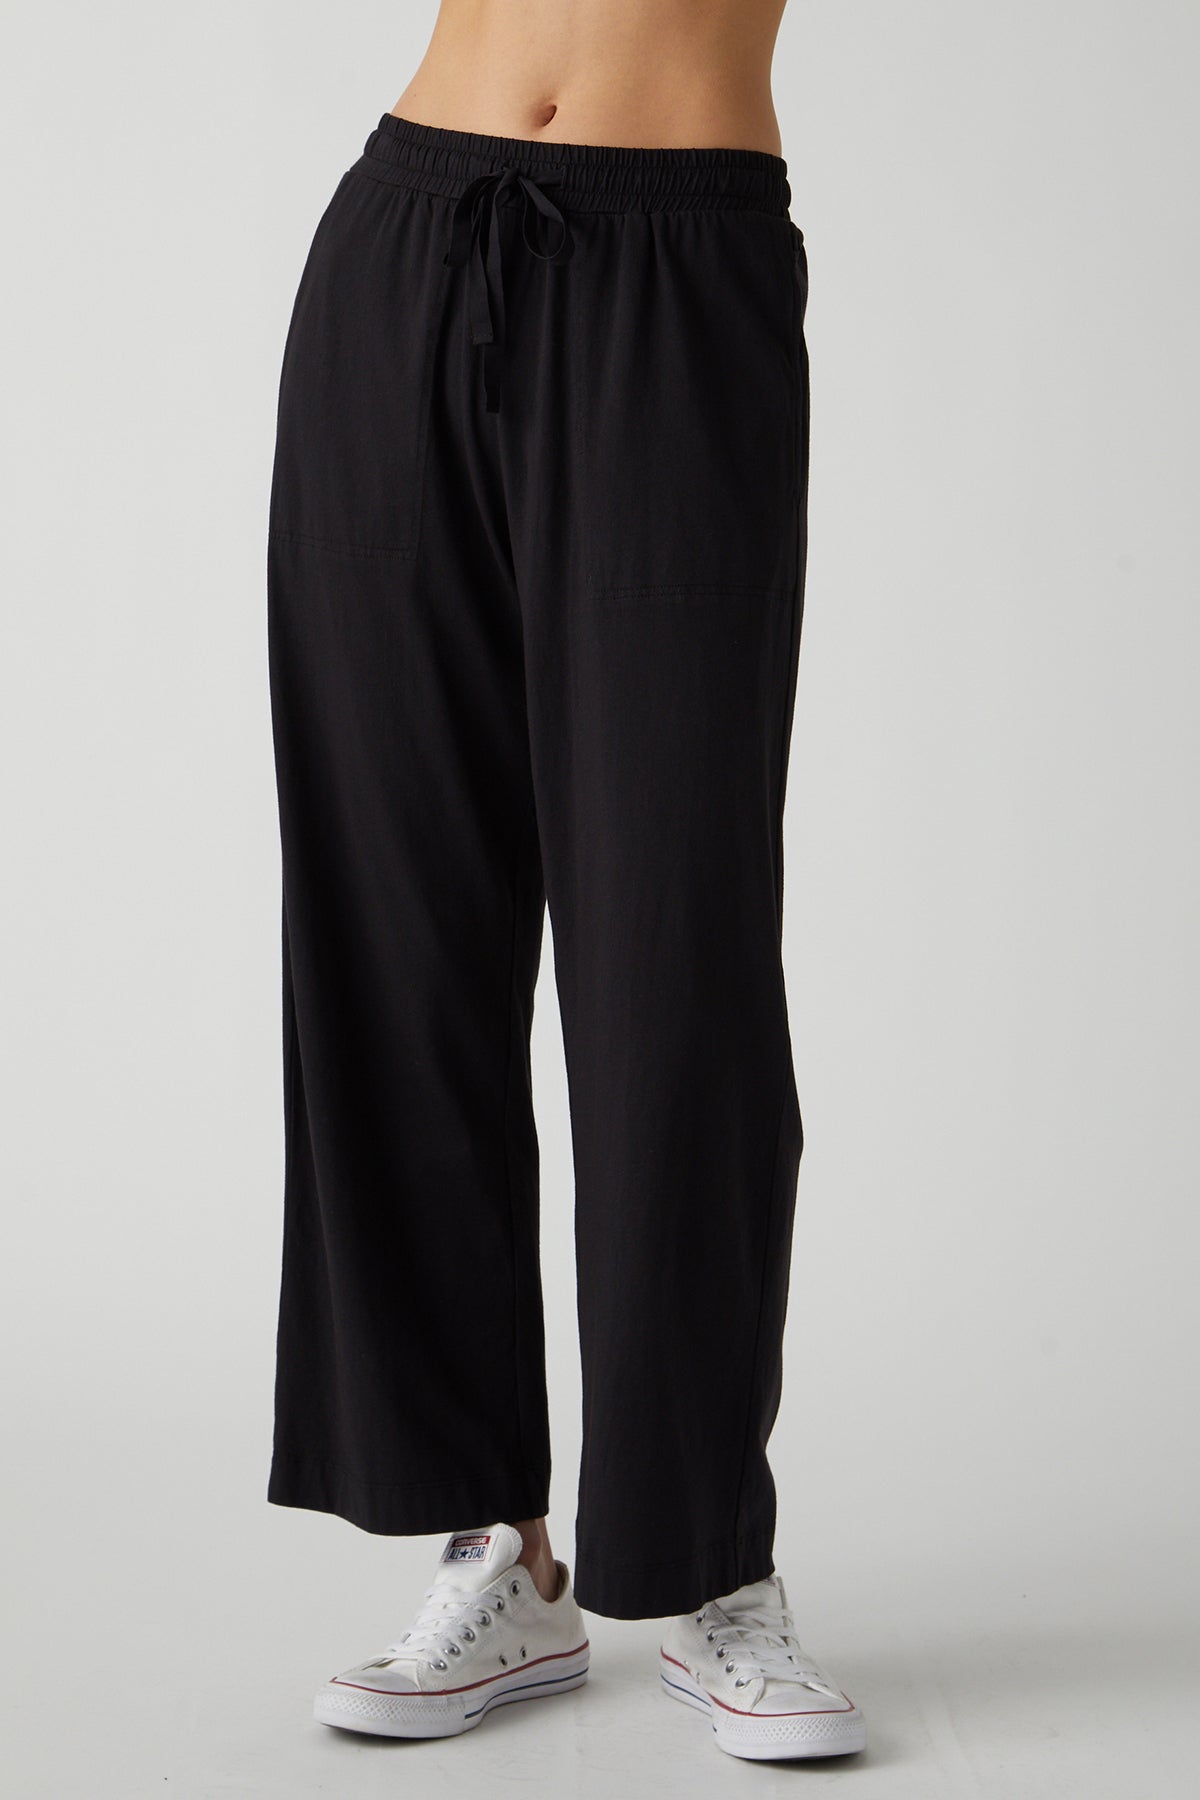 Pismo Pant in black front-25156538695873